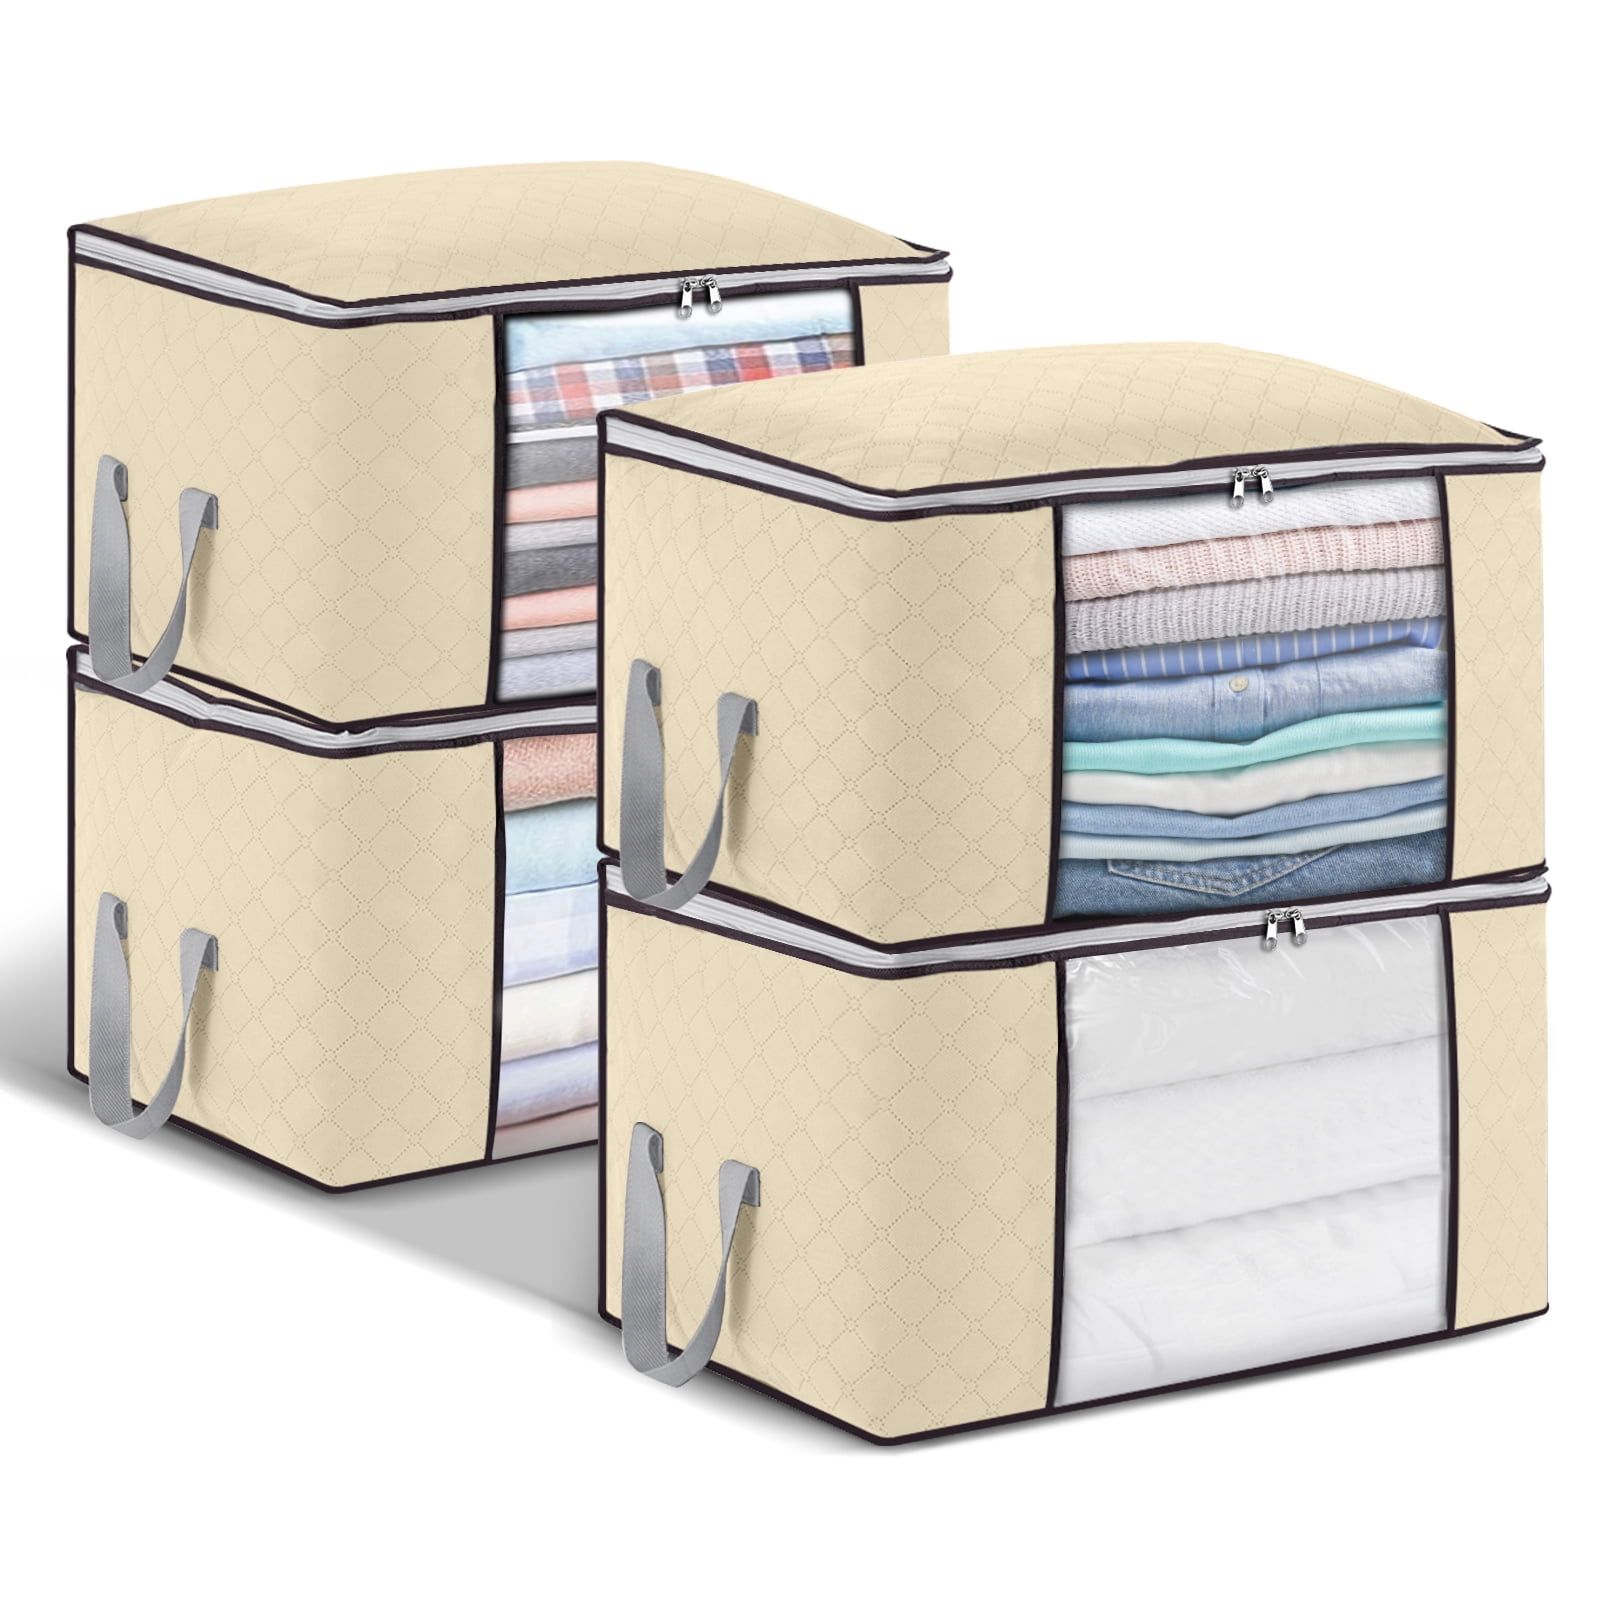 Multilayer Medicine Cabinet Foldable Blanket Storage Bags Storage Containers  for Organizing Bedroom Closet Clothing Organization - AliExpress